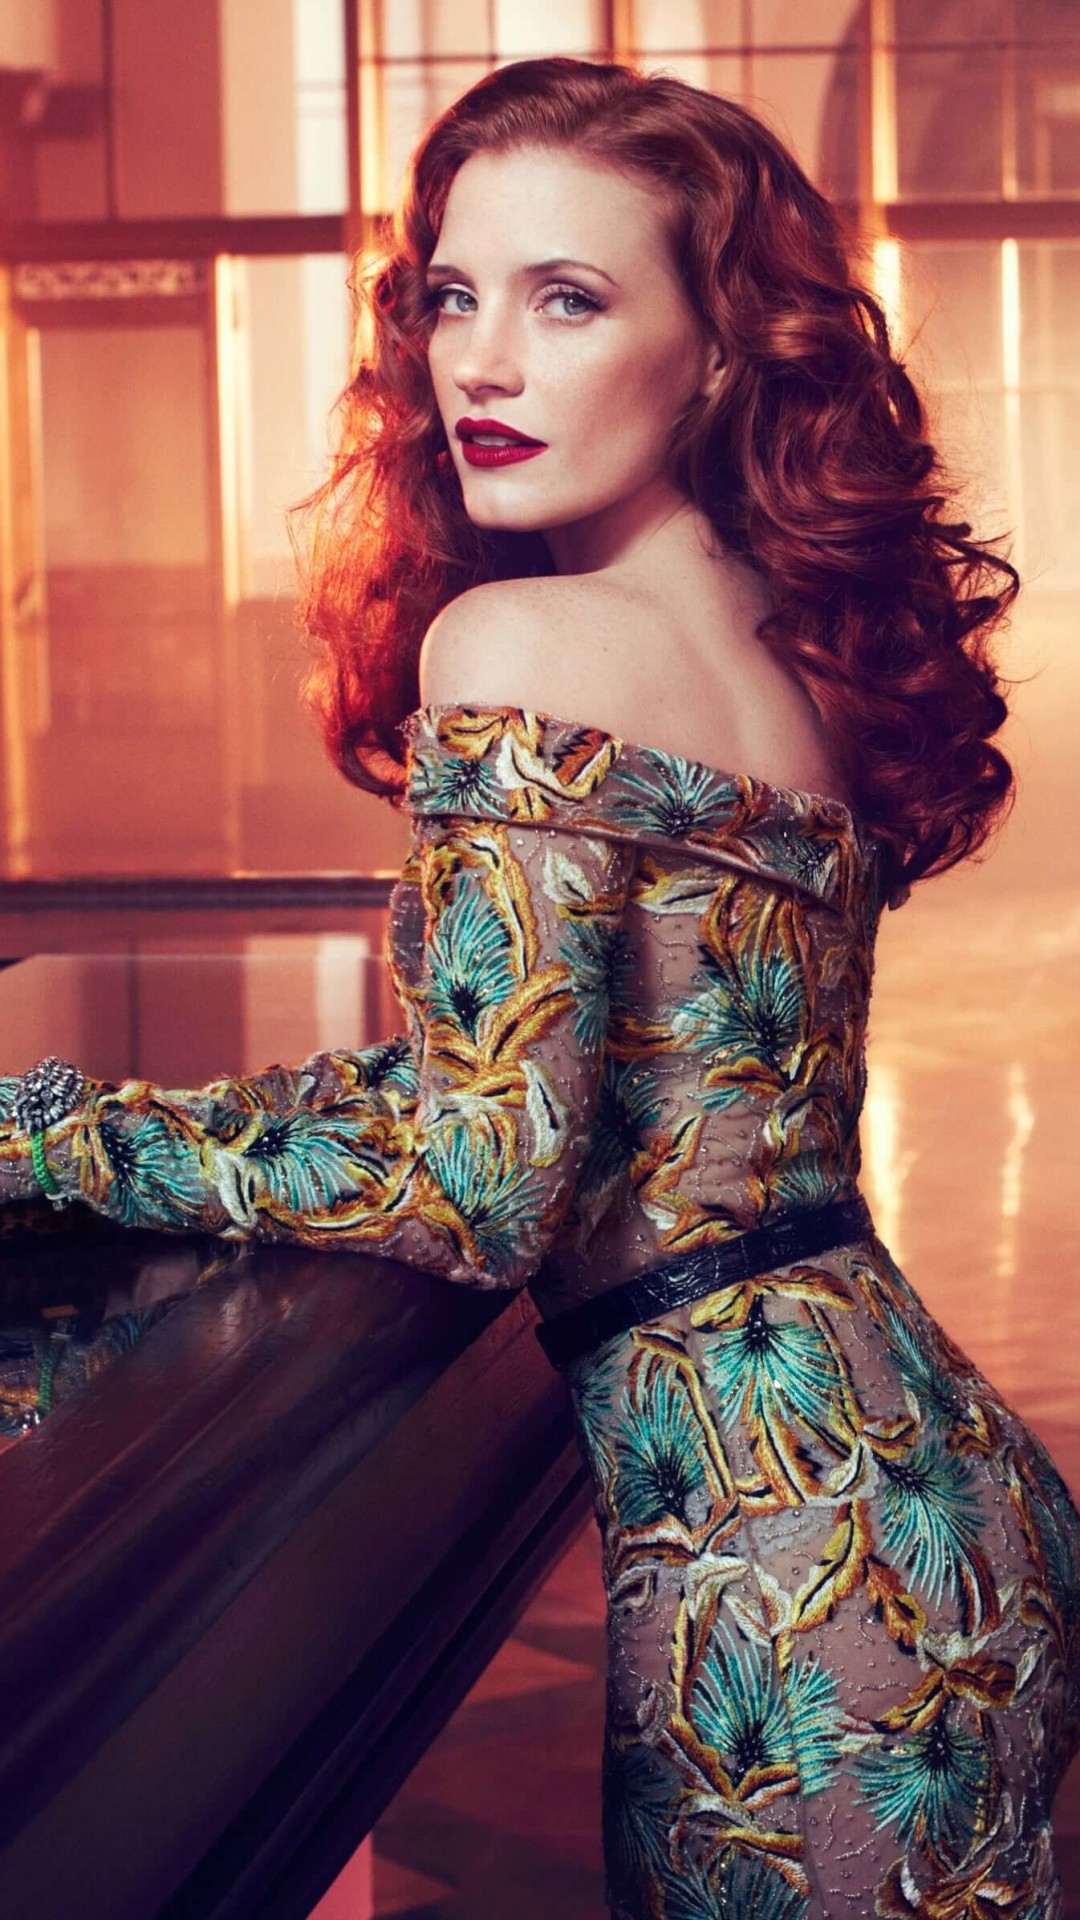 Jessica Chastain Wallpaper for SAMSUNG Galaxy Note 3